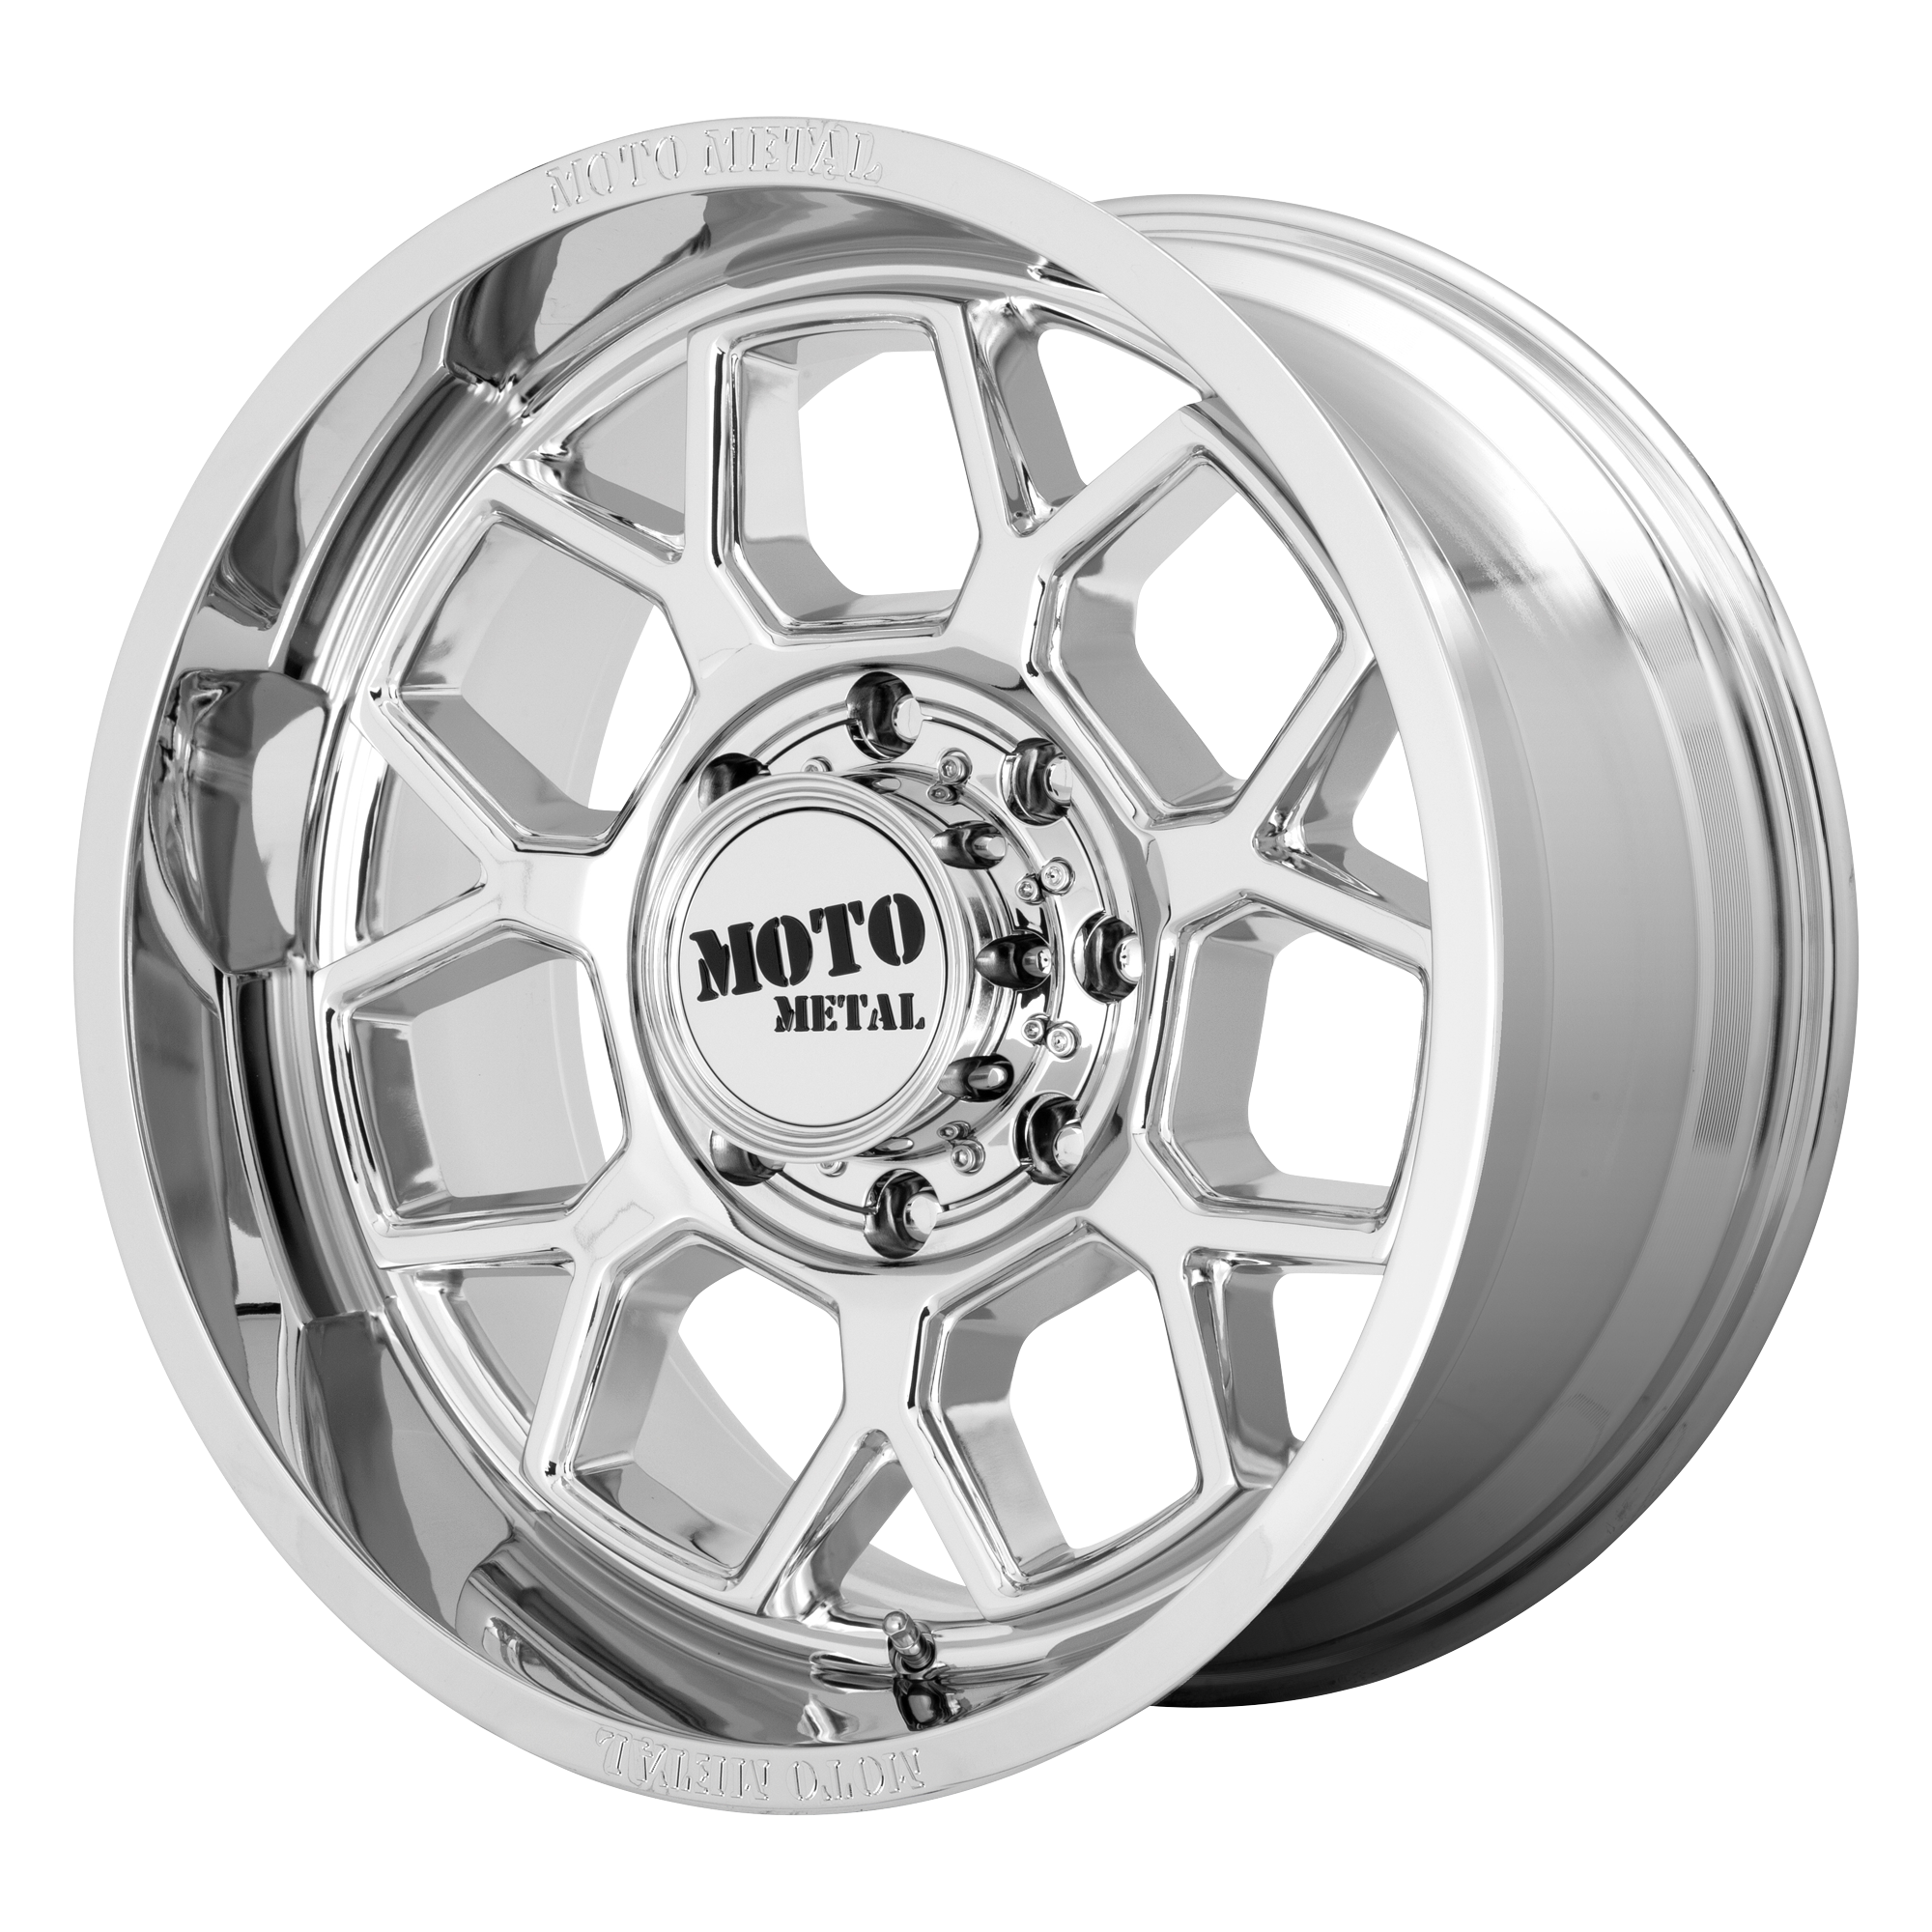 BANSHEE 20x10 8x180.00 CHROME (-18 mm) - Tires and Engine Performance